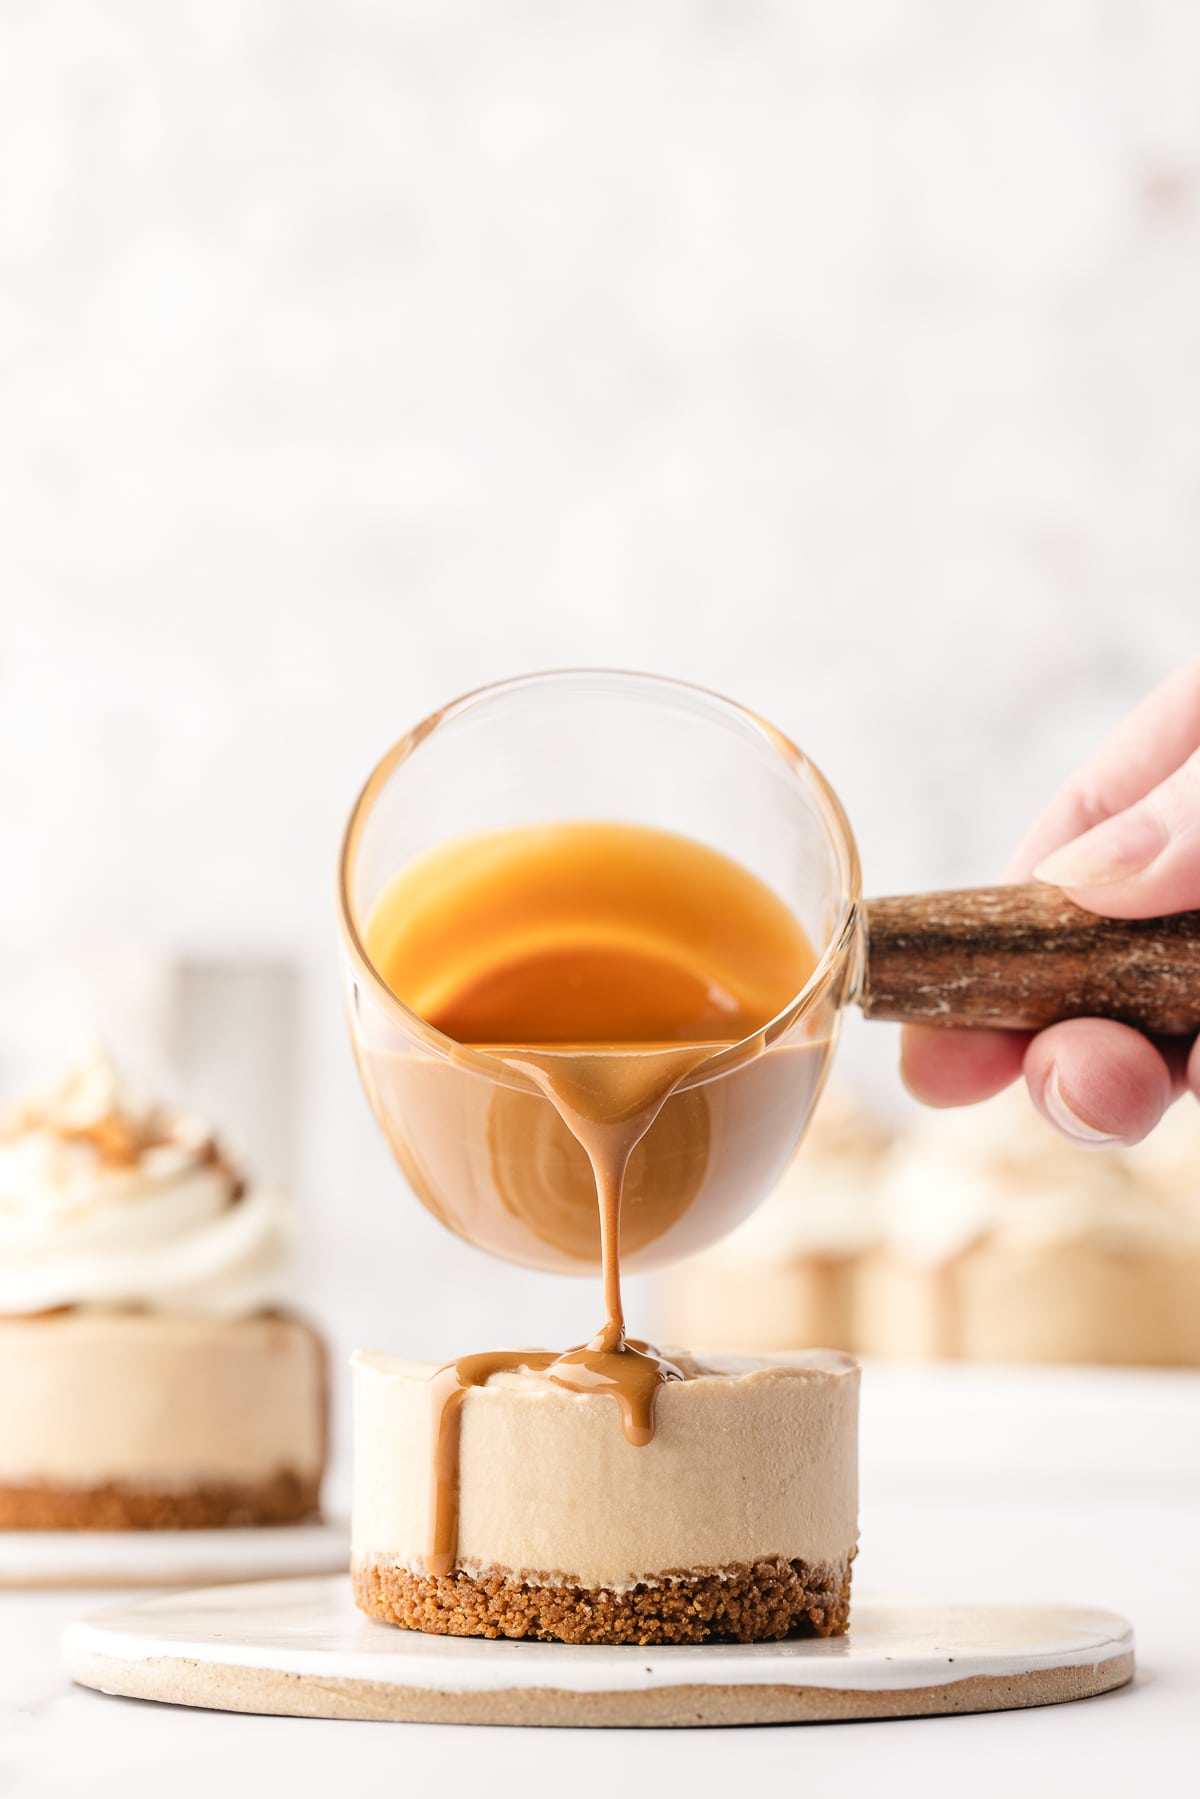 Warmed Biscoff spread being poured over a mini Biscoff cheesecake.